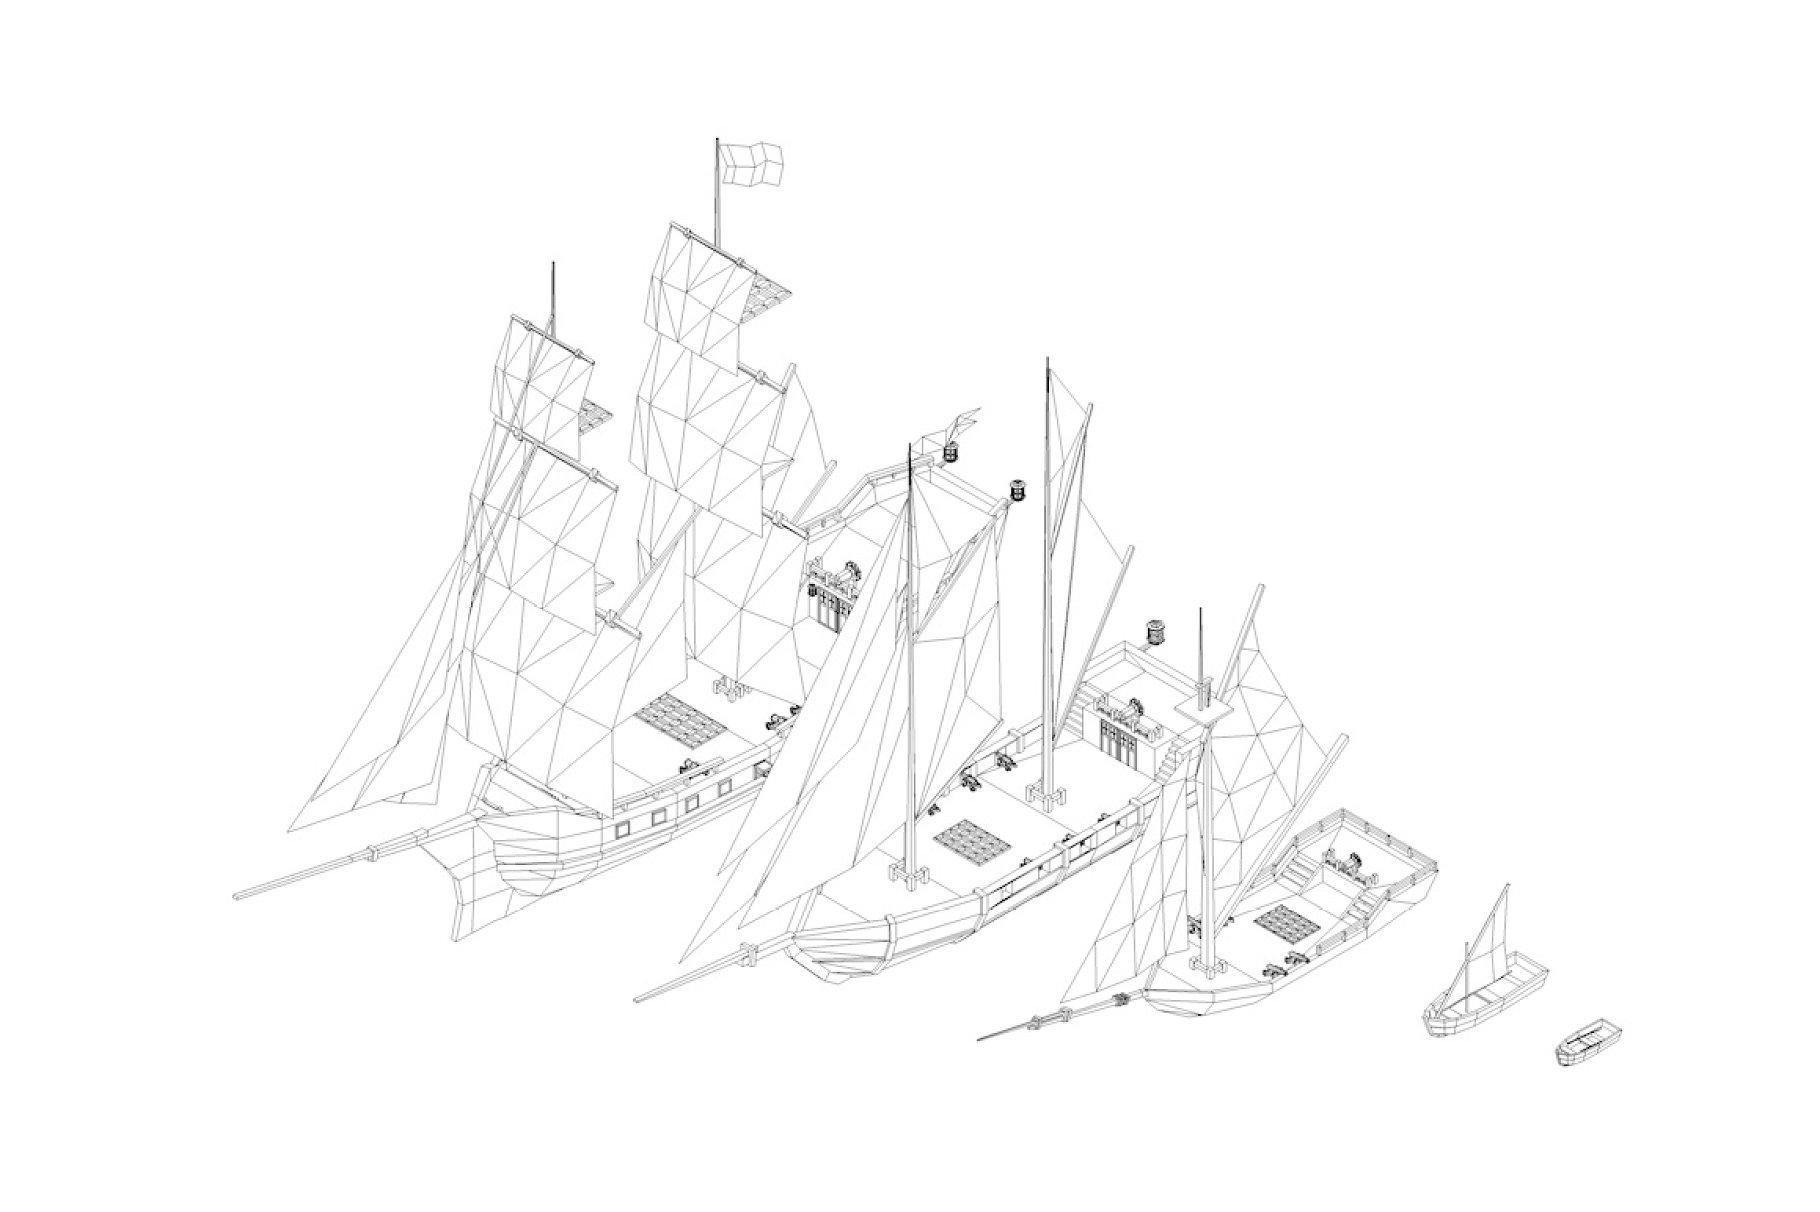 Outline illustration of low poly pirate ships on a white background.